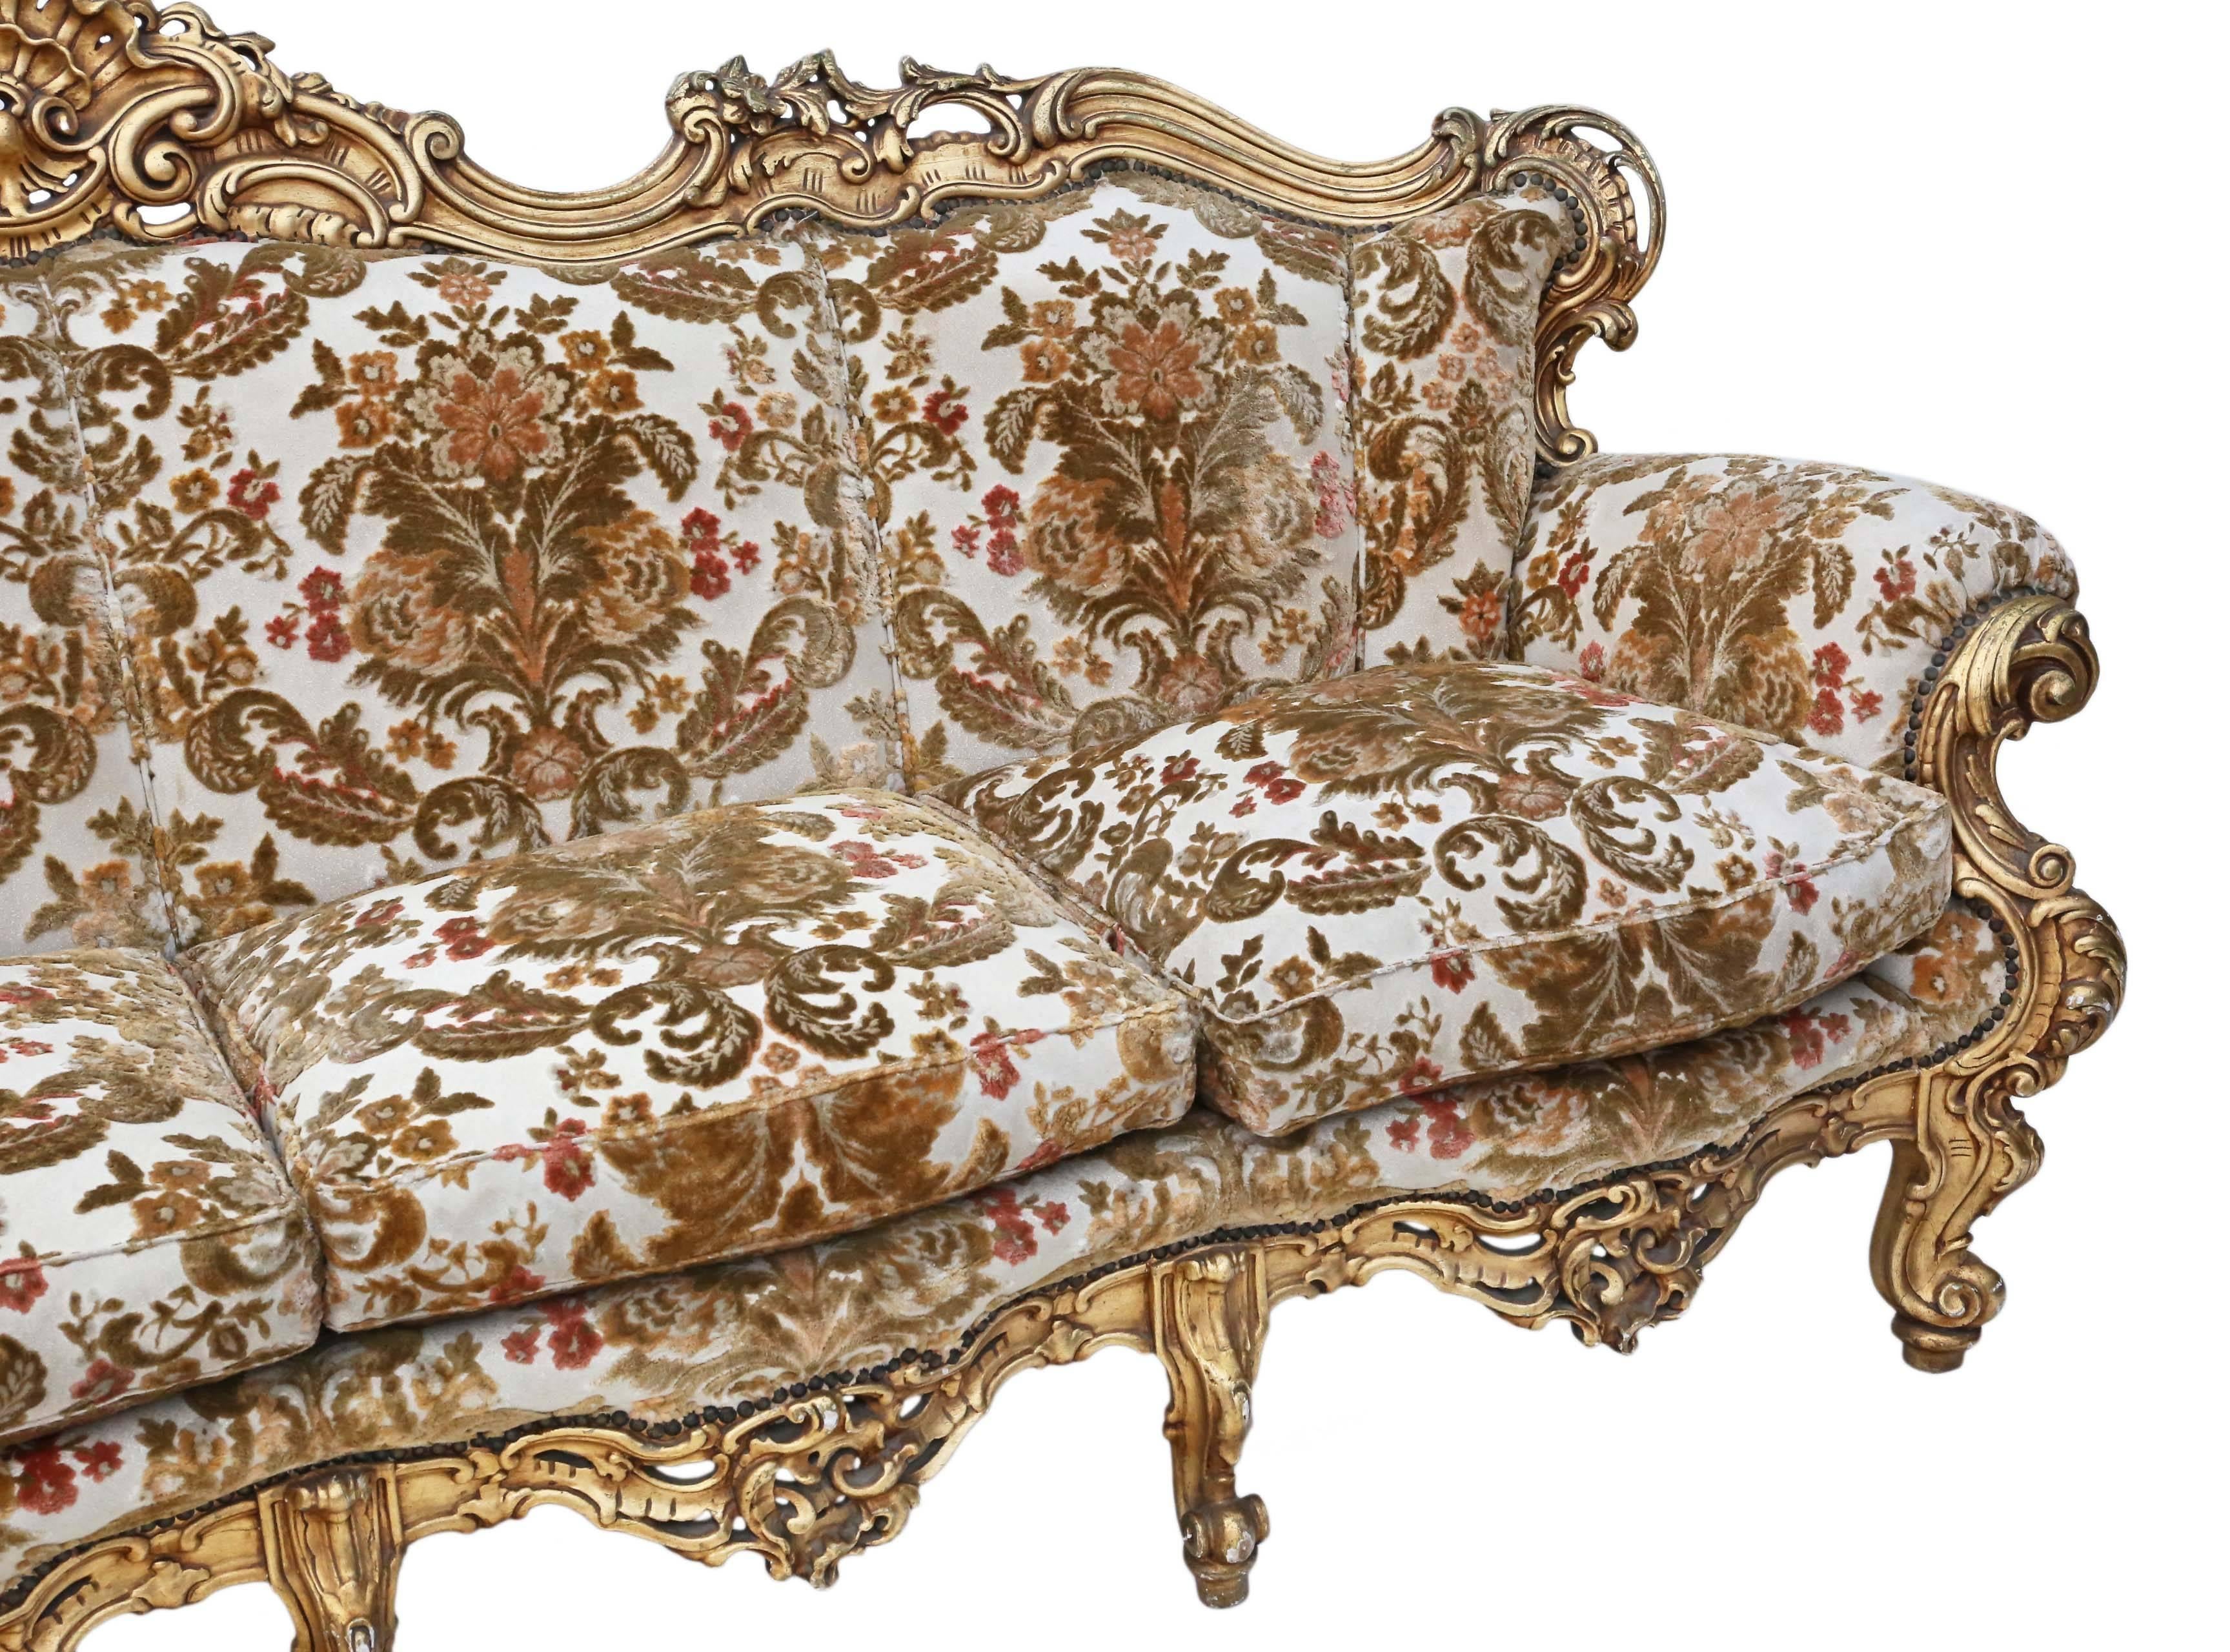 Antique Large Quality French Giltwood Sofa Settee Chaise Longue For Sale 1